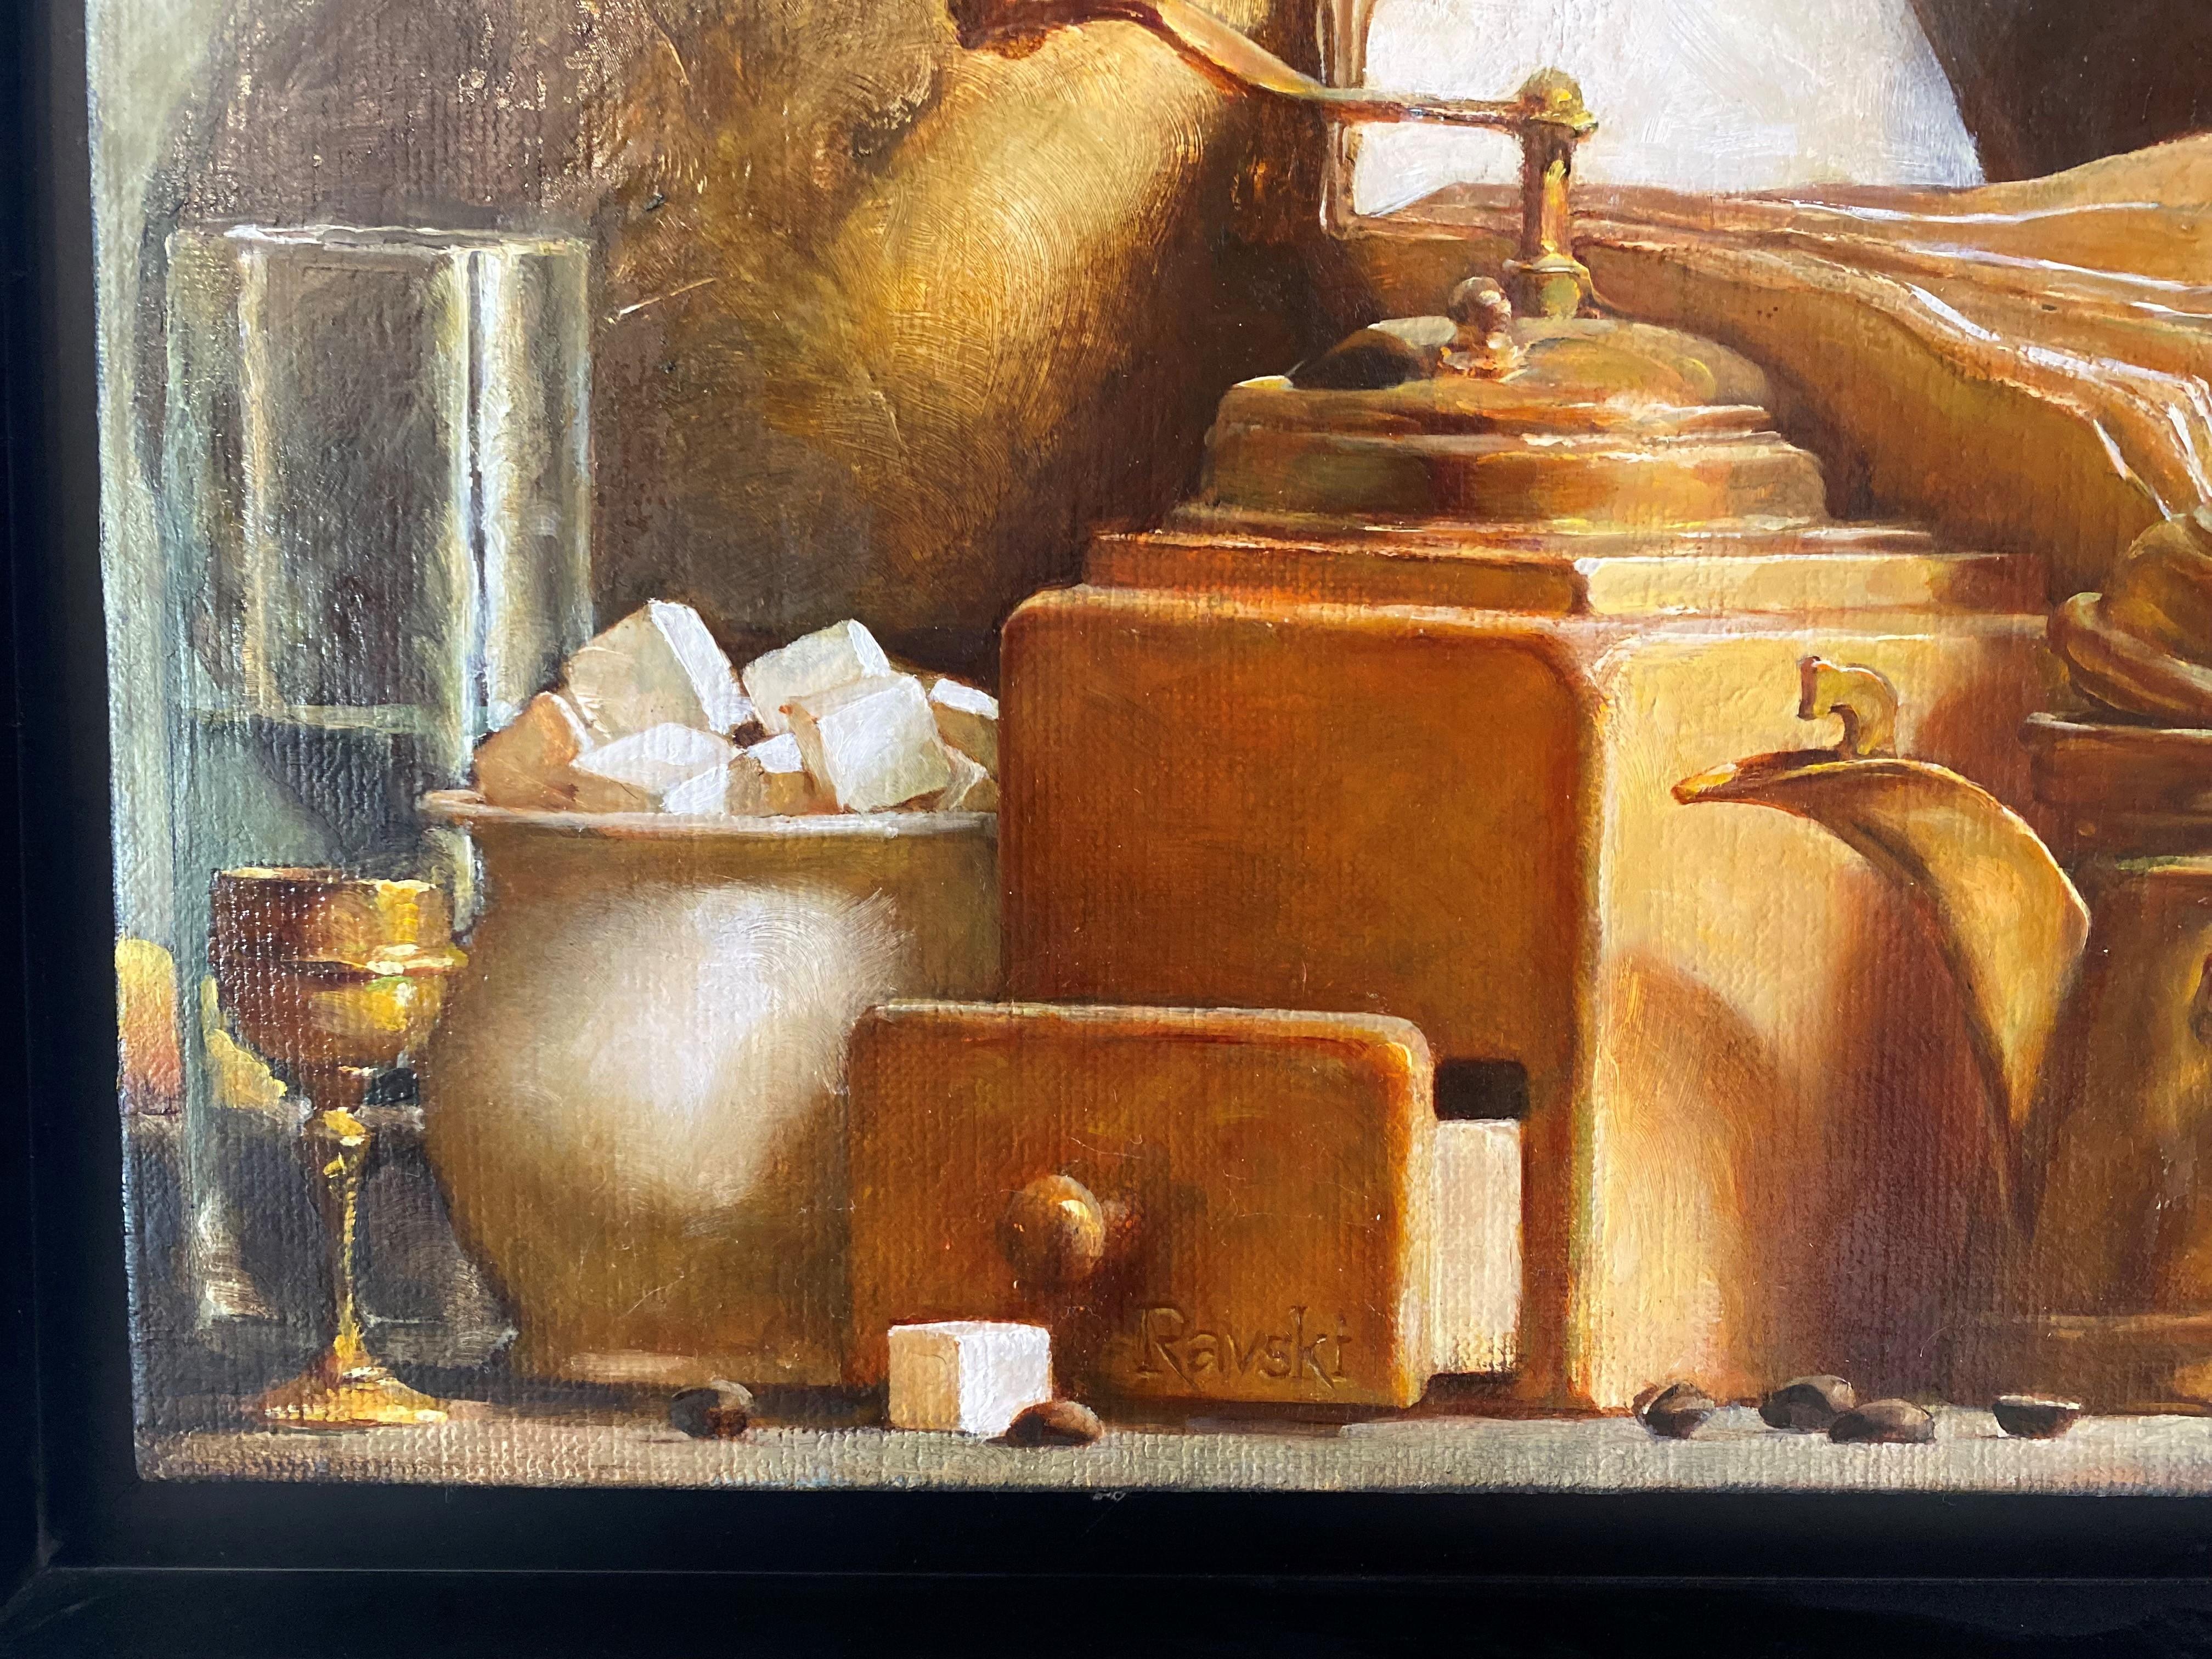  A Cup of Coffee, 2020  - Brown Figurative Painting by Alexej RAVSKI